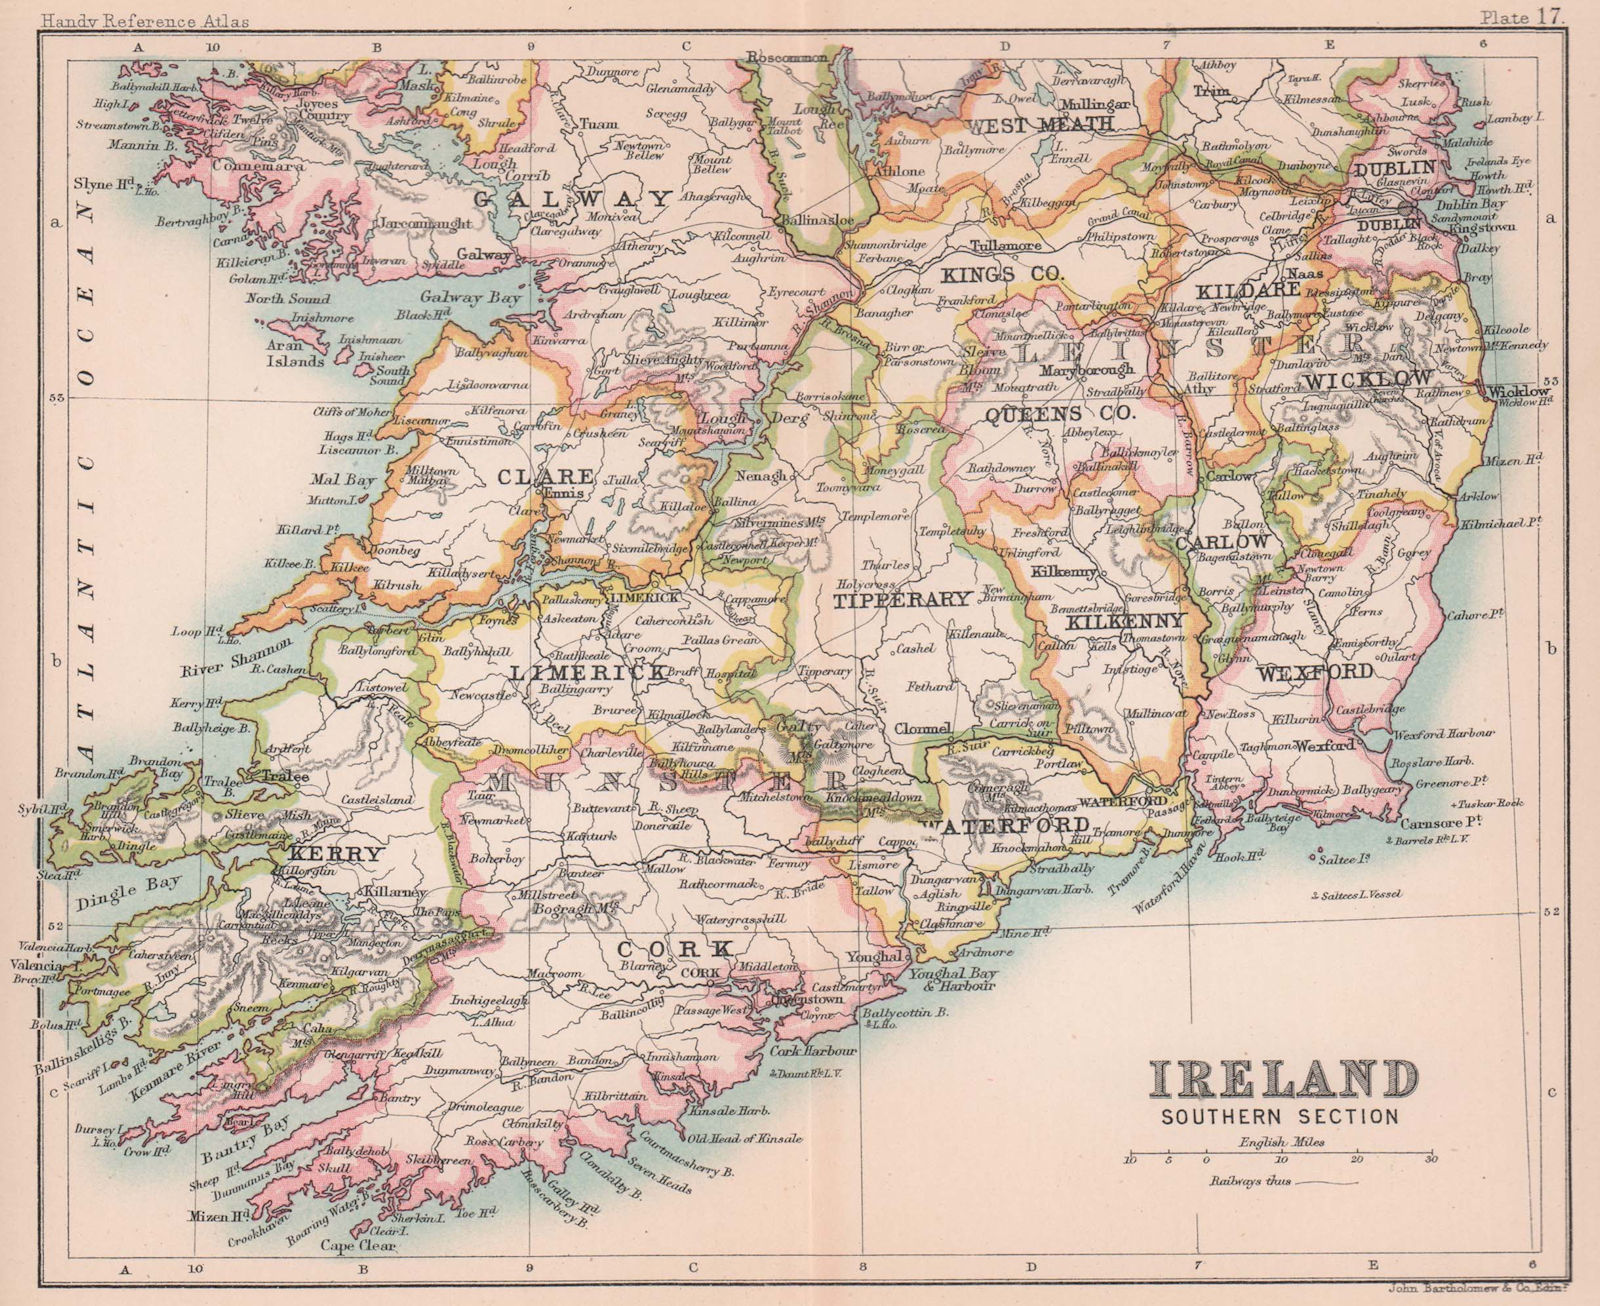 Associate Product Ireland, Southern section. BARTHOLOMEW 1893 old antique vintage map plan chart